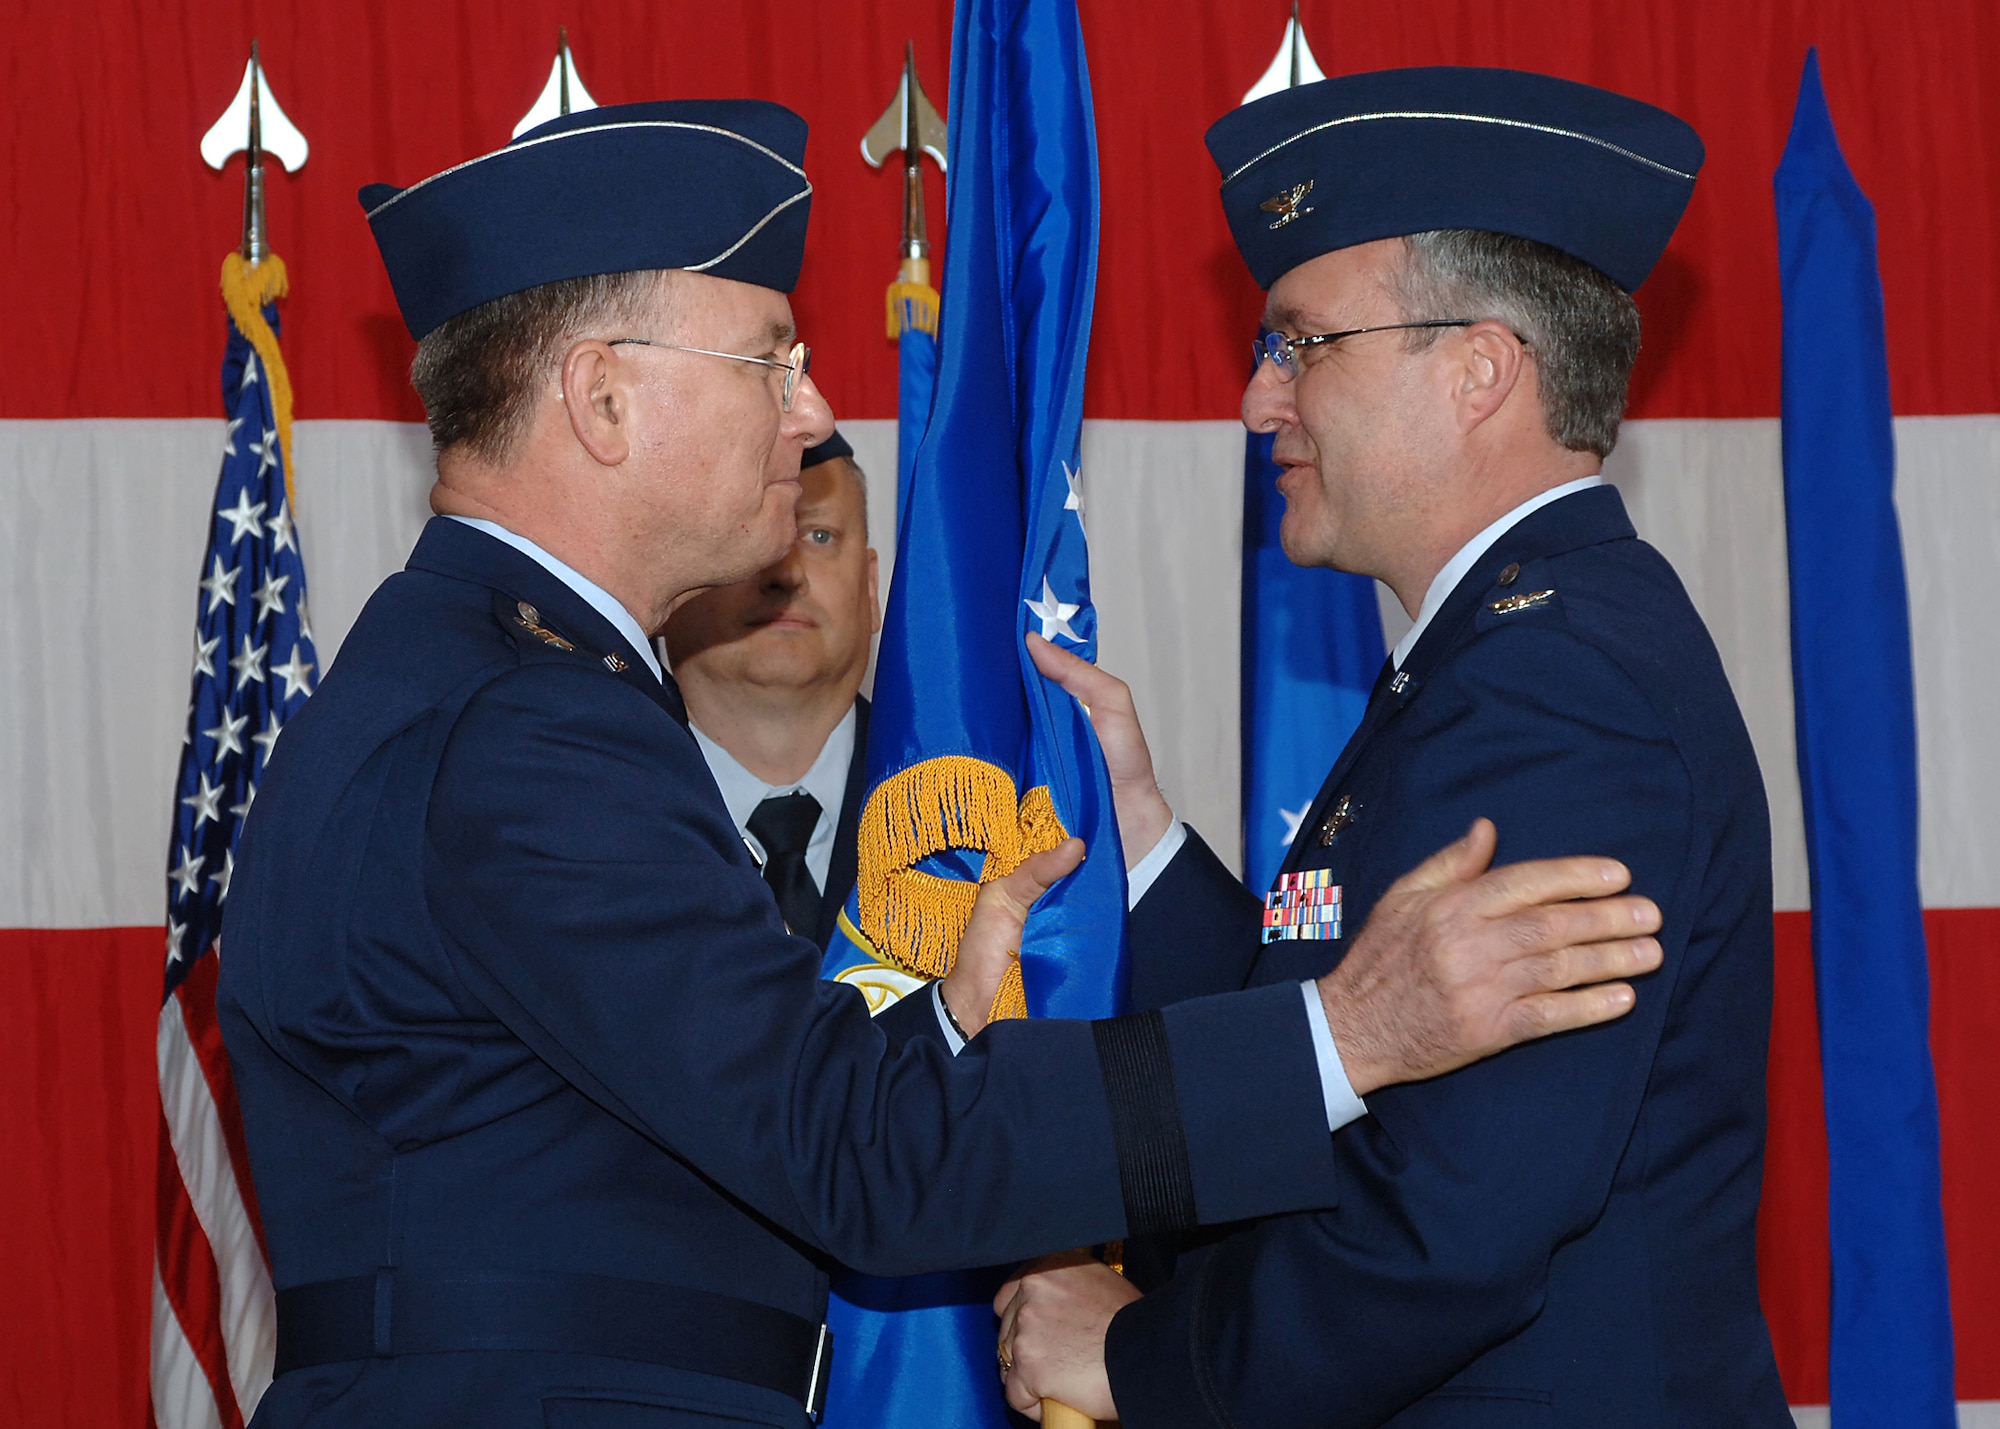 Lt. Gen. John Bradley, left, chief of Air Force Reserve and commander of Air Force Reserve Command, hands the 310th Space Wing colors and command of the Air Force Reserve's first-ever space wing, to Col. Jeff Ansted April 4.  Colonel Ansted took command of the 310th at a ceremony at Peterson Air Force Base, Colo. 

The 310th provides its gaining major command, Air Force Space Command, with experienced people in seven space squadrons to man space-based systems including Defense Meteorological satellites for weather observation, Midcourse Space Experiment satellite to conduct space surveillance, the Space-Based Infrared System for early missile warning and Global Positioning System satellites used for navigation.  

The wing also includes a test squadron, several base support squadrons, medical staff and the Reserve National Security Space Institute.  In all, ten squadrons, five stand-alone flights and the institute report to the 310th SW.

(U.S. Air Force Photo/Amber K. Whittington)